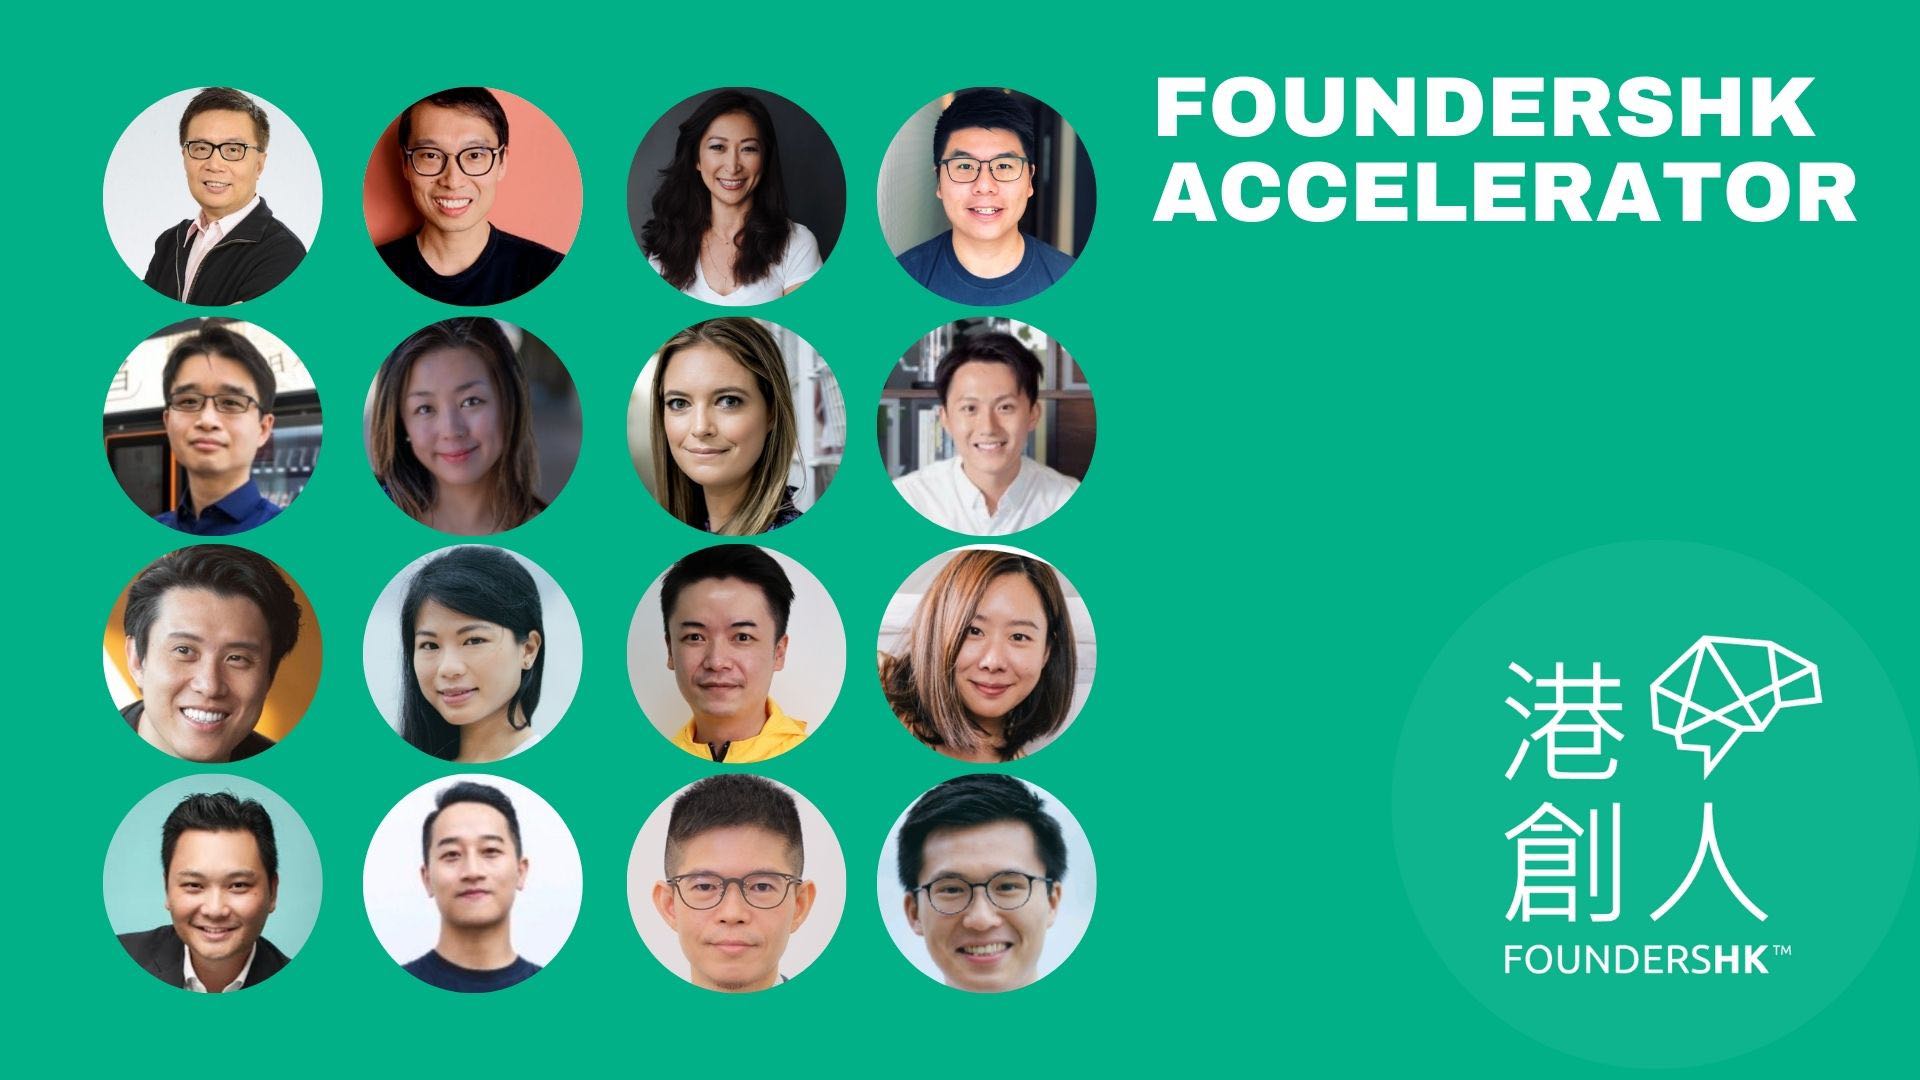 People from FoundersHK Accelerate's leadership team and first batch of founders